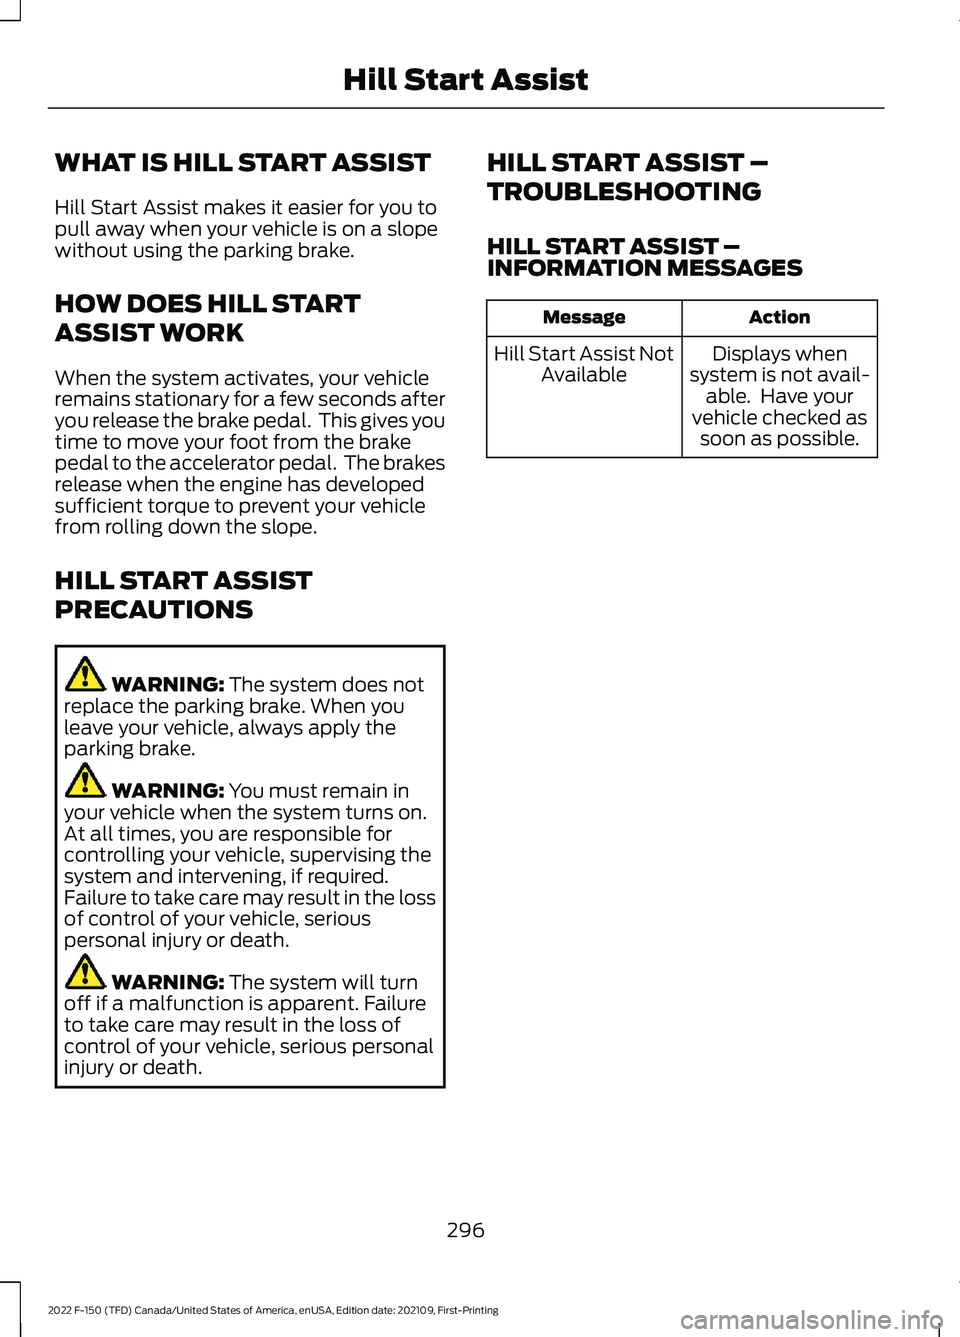 FORD F-150 2022  Owners Manual WHAT IS HILL START ASSIST
Hill Start Assist makes it easier for you to
pull away when your vehicle is on a slope
without using the parking brake.
HOW DOES HILL START
ASSIST WORK
When the system activa